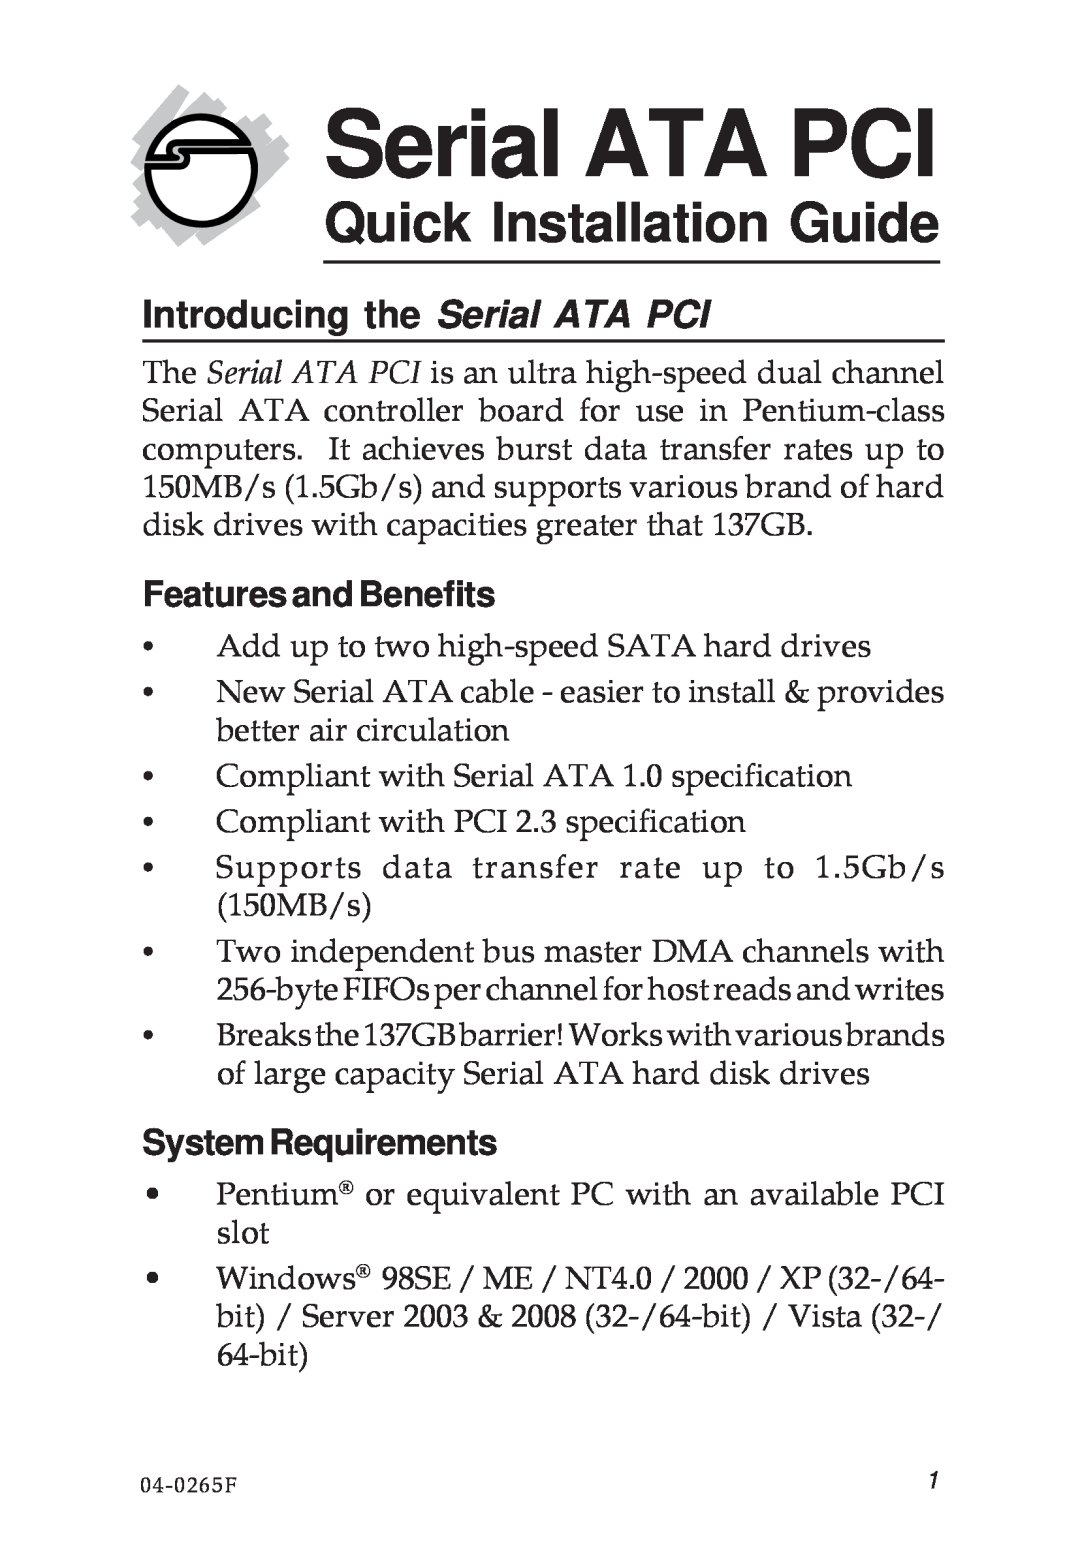 SIIG 04-0265F specifications Introducing the Serial ATA PCI, Features and Benefits, SystemRequirements 